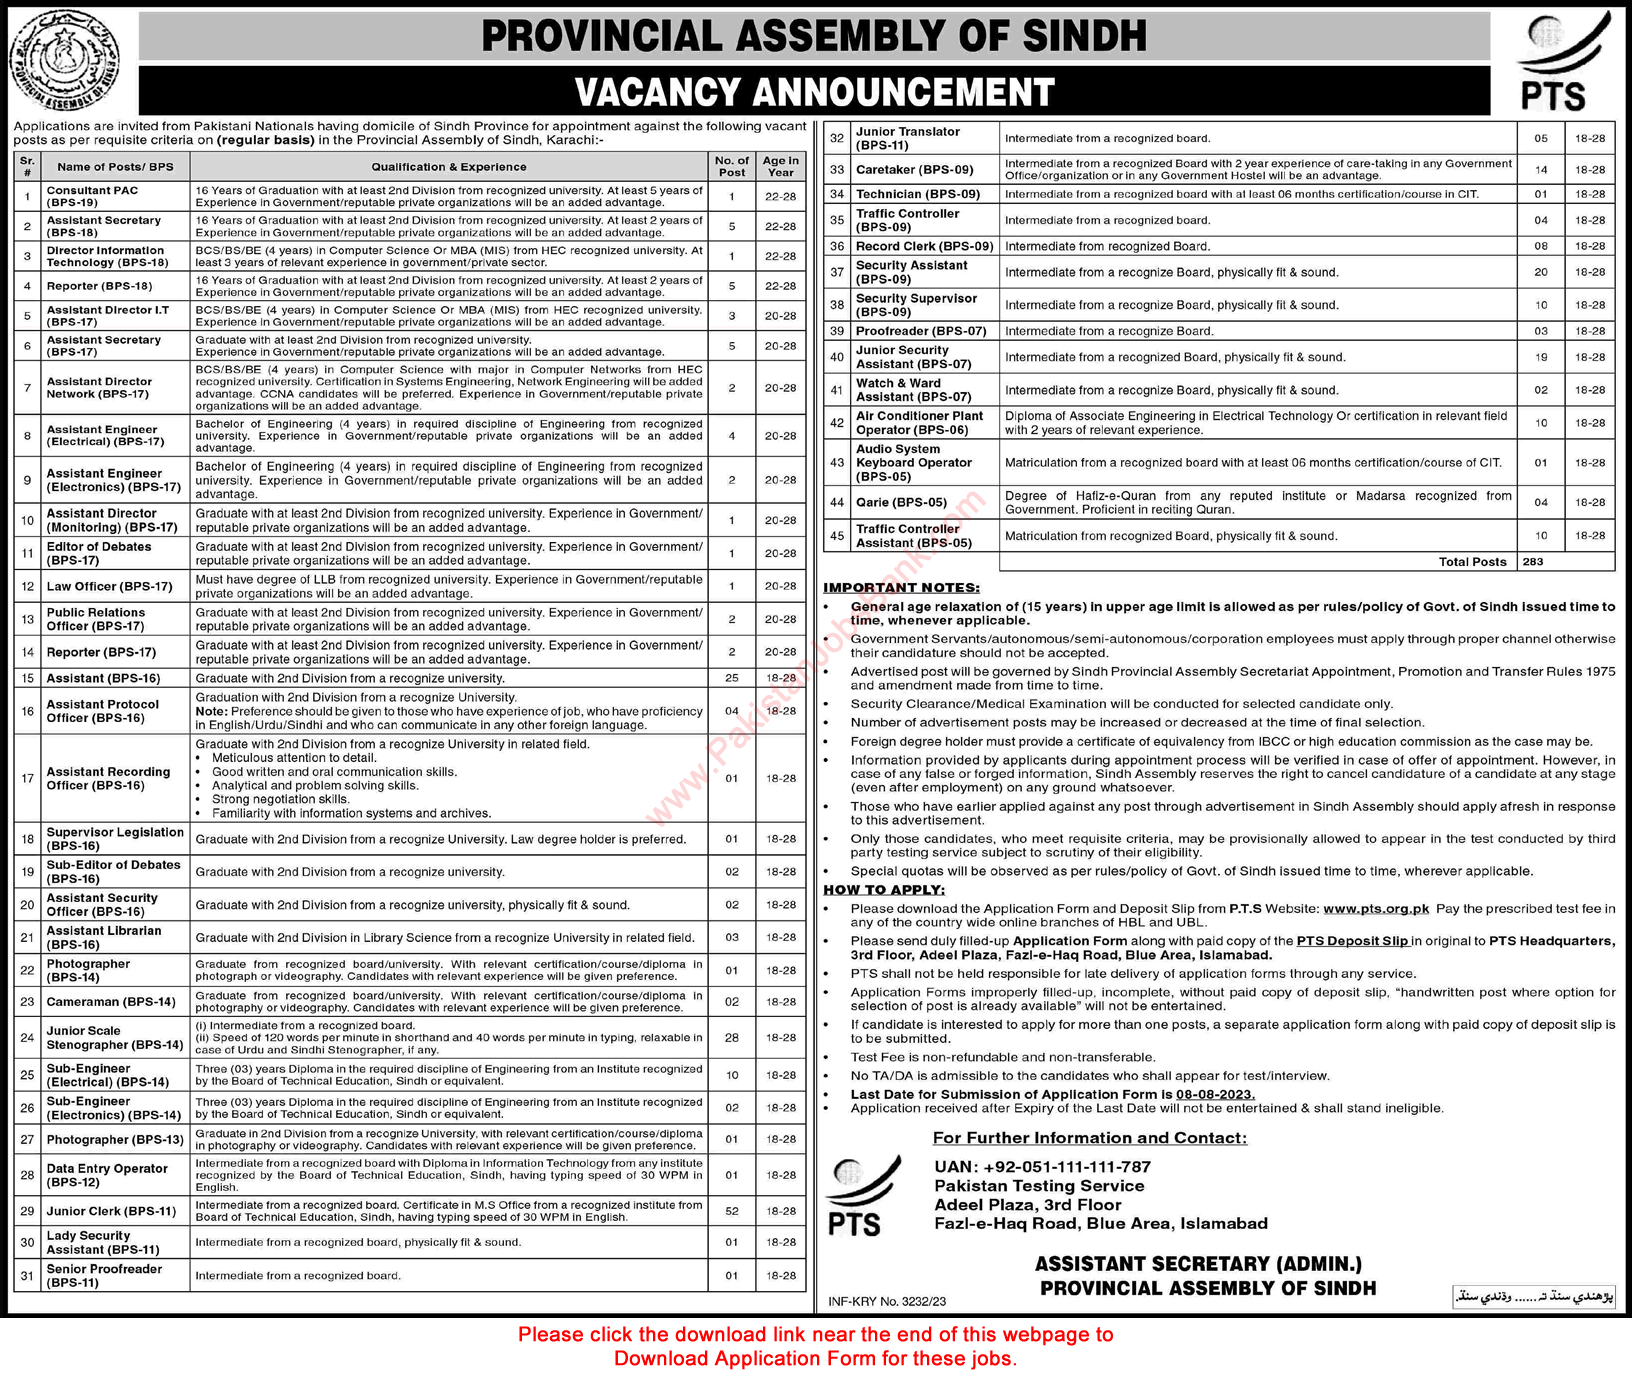 Provincial Assembly of Sindh Jobs 2023 July PTS Application Form Assistants, Engineers, Clerks & Others Latest